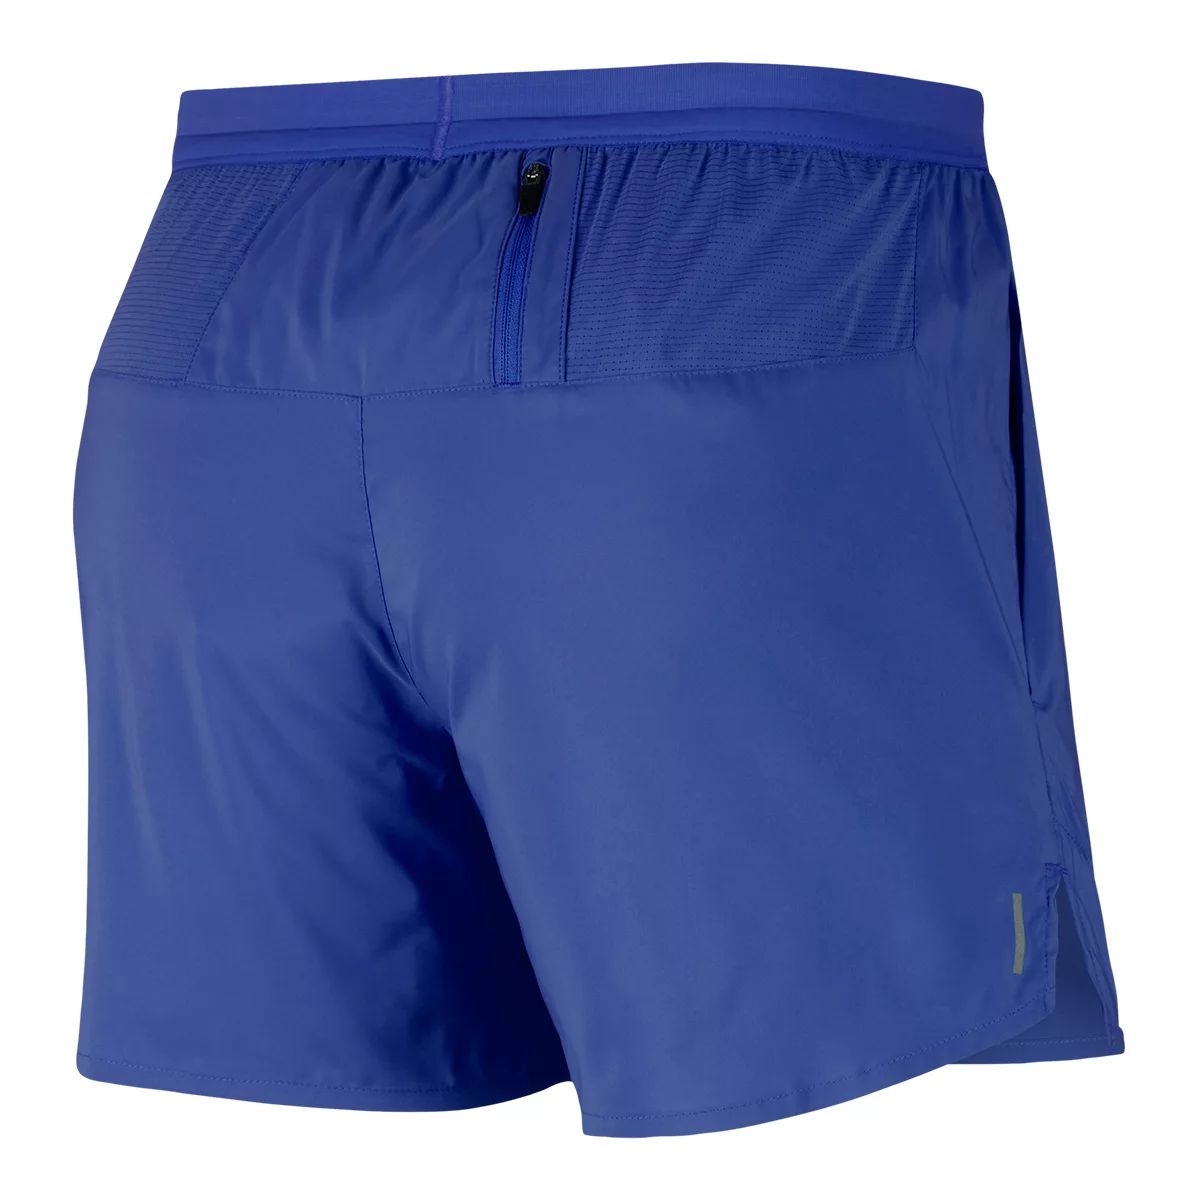 Nike Flex Stride Shorts 5 BF Iron Grey/Heather/Reflective Silver XL 5 :  : Clothing, Shoes & Accessories